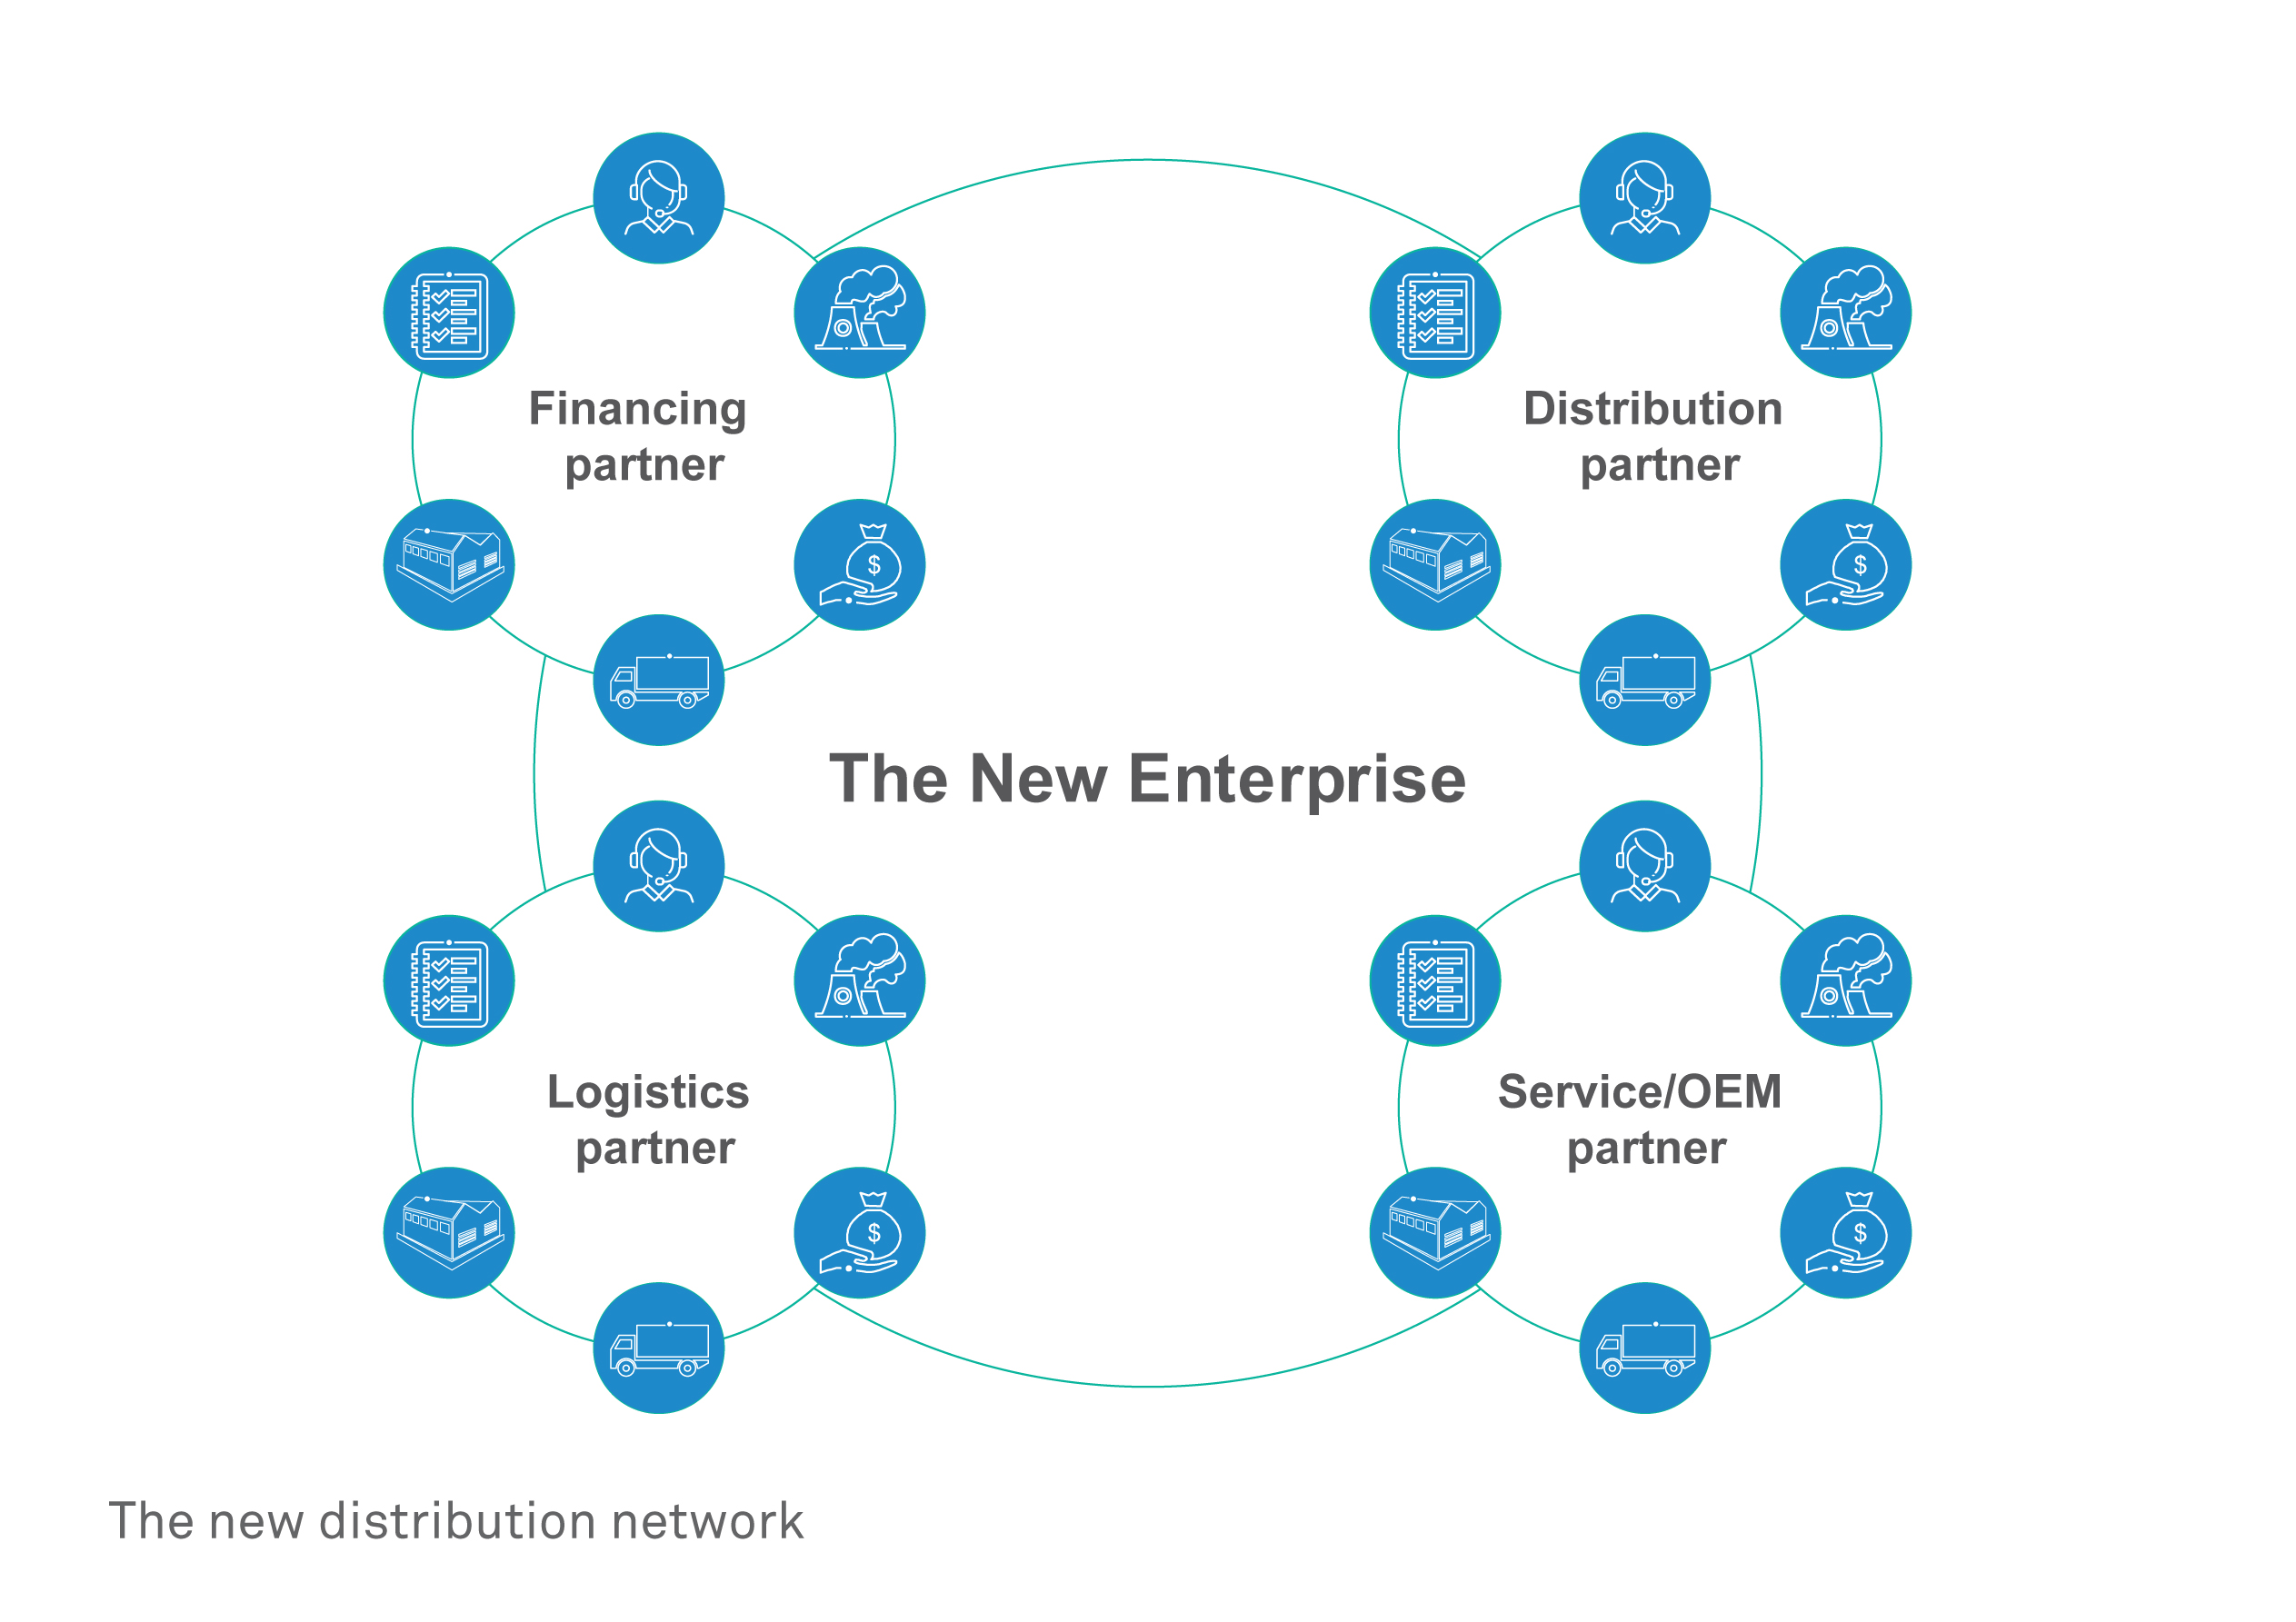 The Network is the new Enterprise